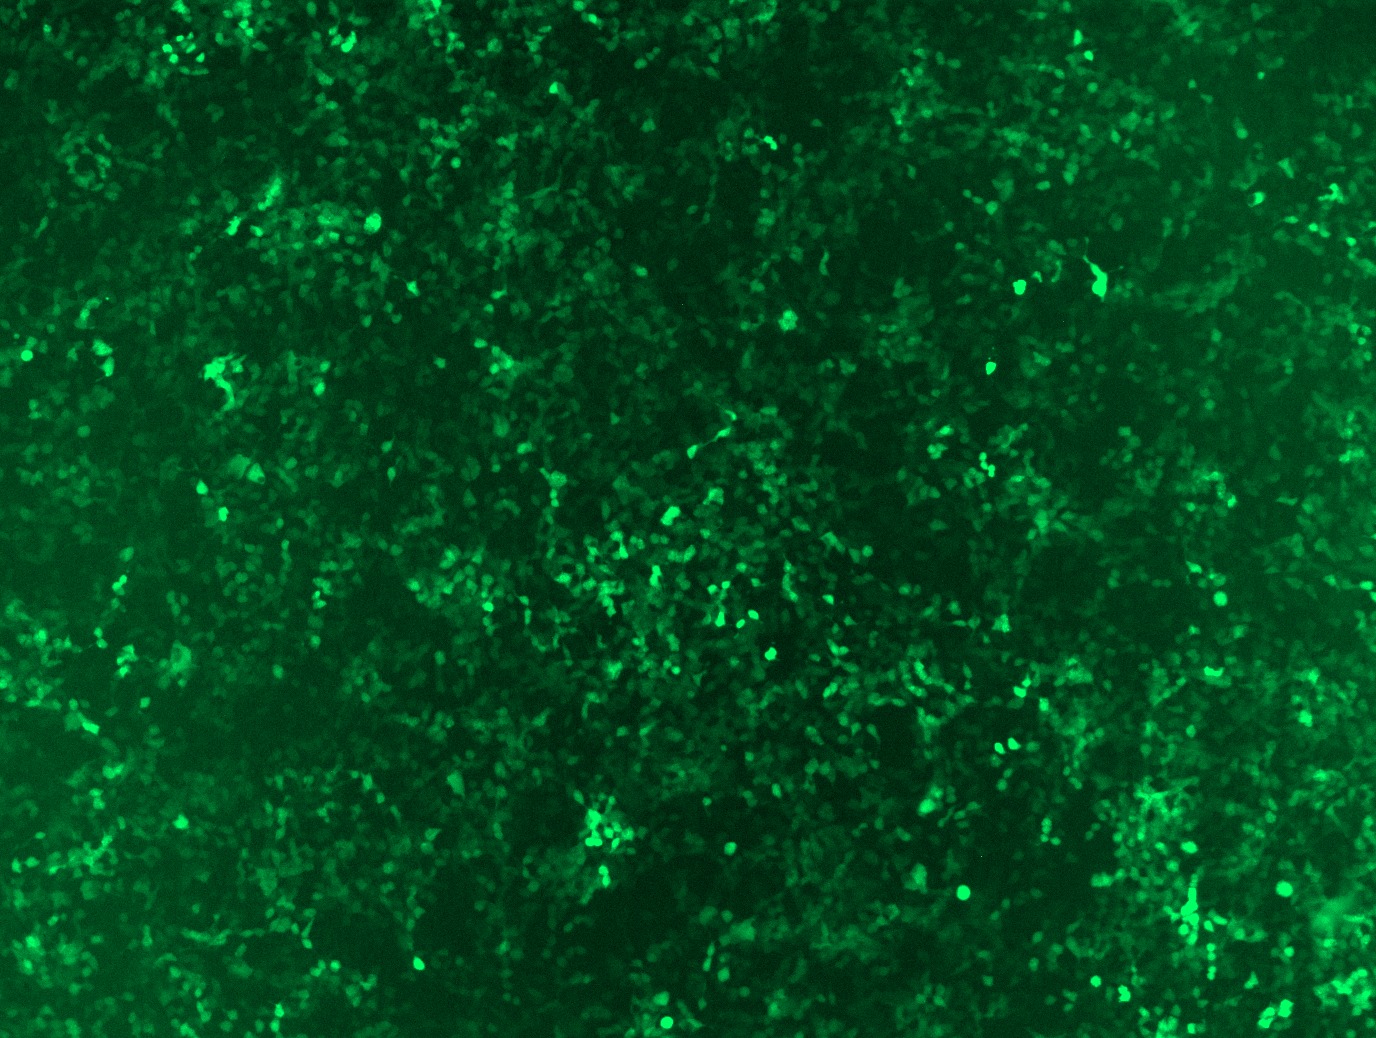 GFP signal was observed under microscope at 48 hours after transduction of TL308170A virus into HEK293 cells. TL308170A virus was prepared using lenti-shRNA TL308170A and TR30037 packaging kit.